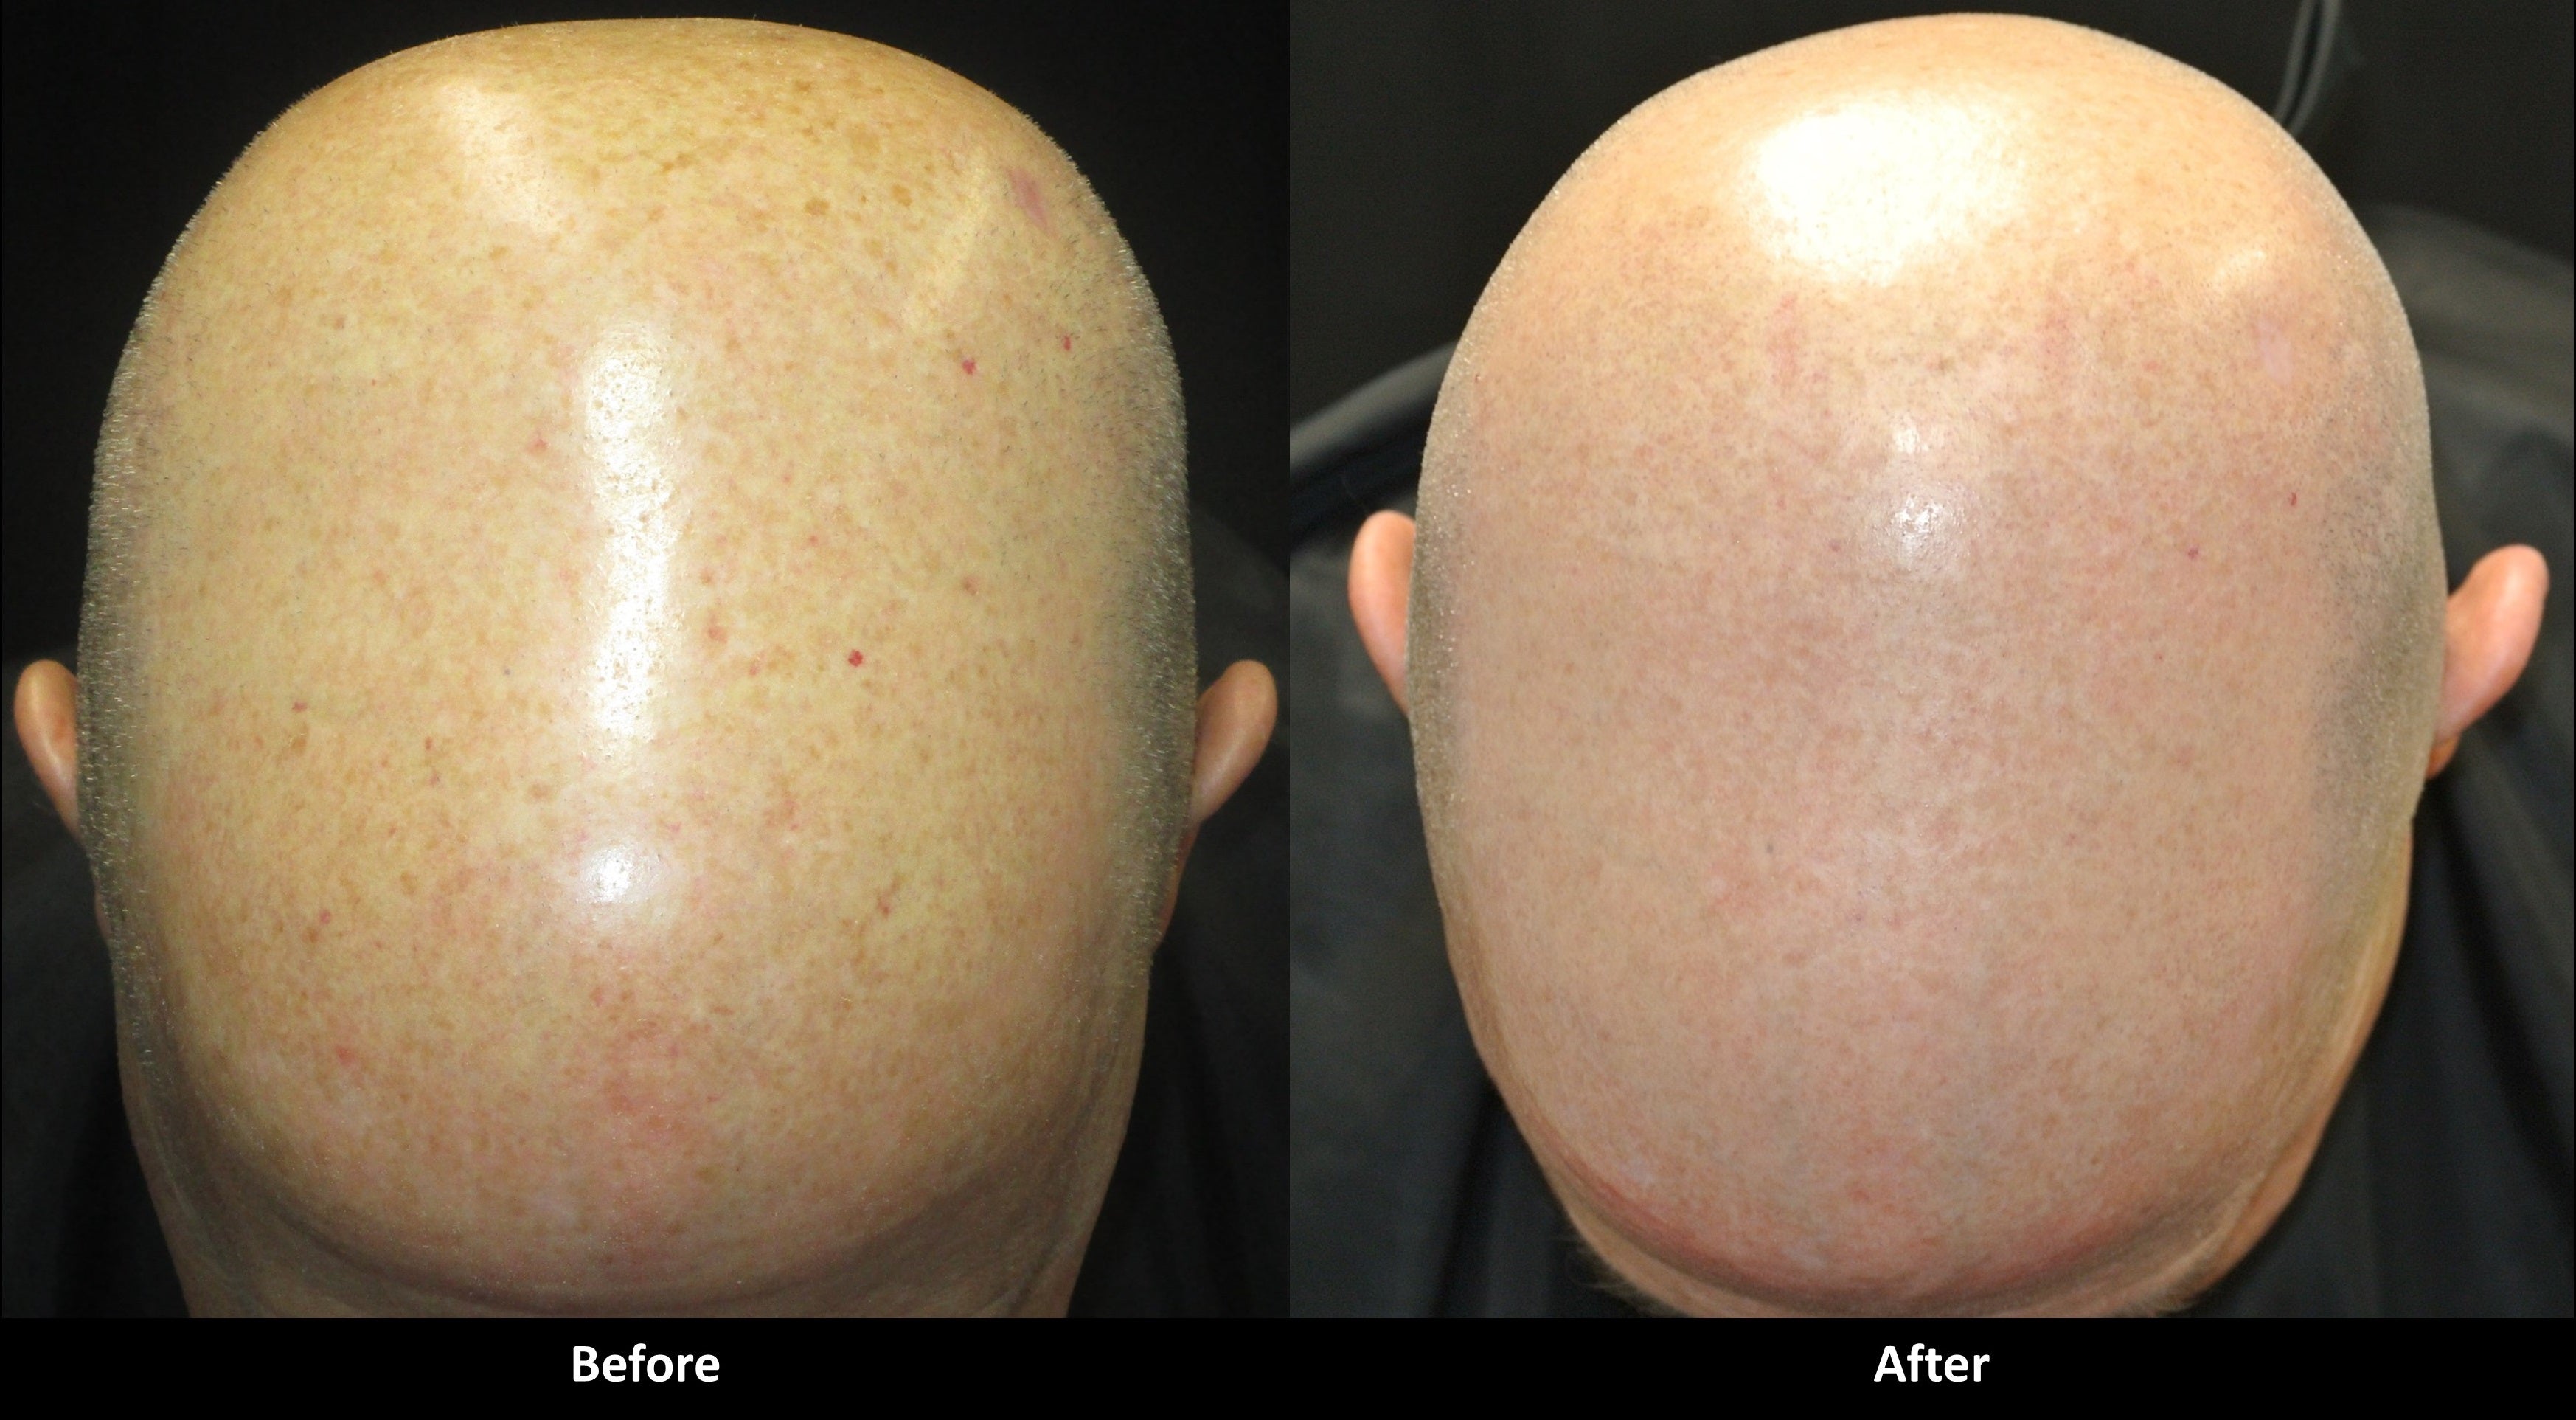 Soft and Smooth Rejuvenation before and after